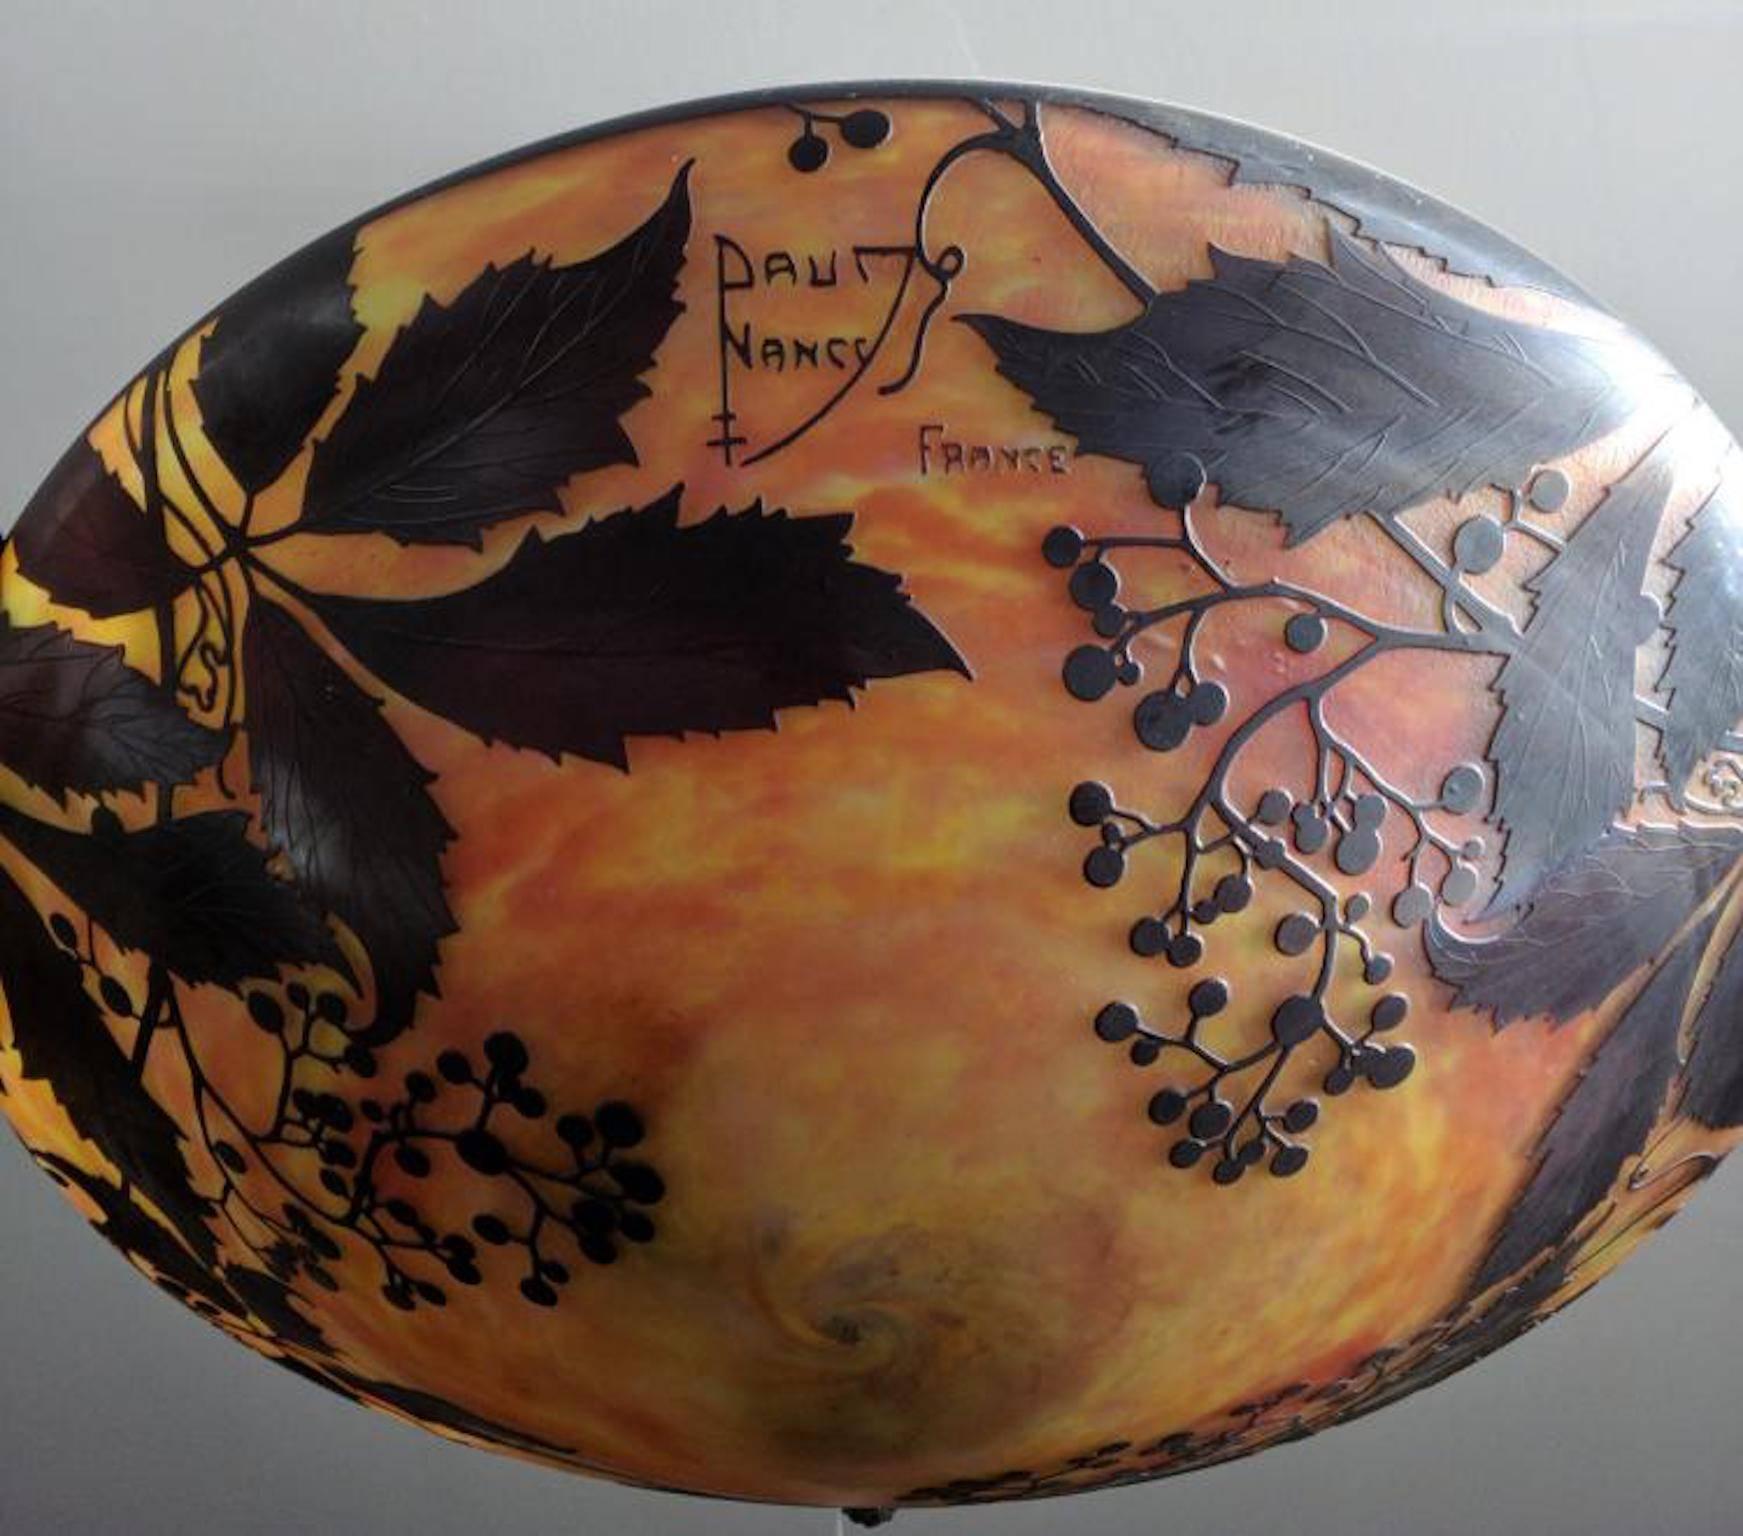 The glass bowl hanging on three struts, the surface etched with lush wild vines decor, the frosted glass with cloudy powder merges in yellow and purple.
Signed Daum Nancy France.